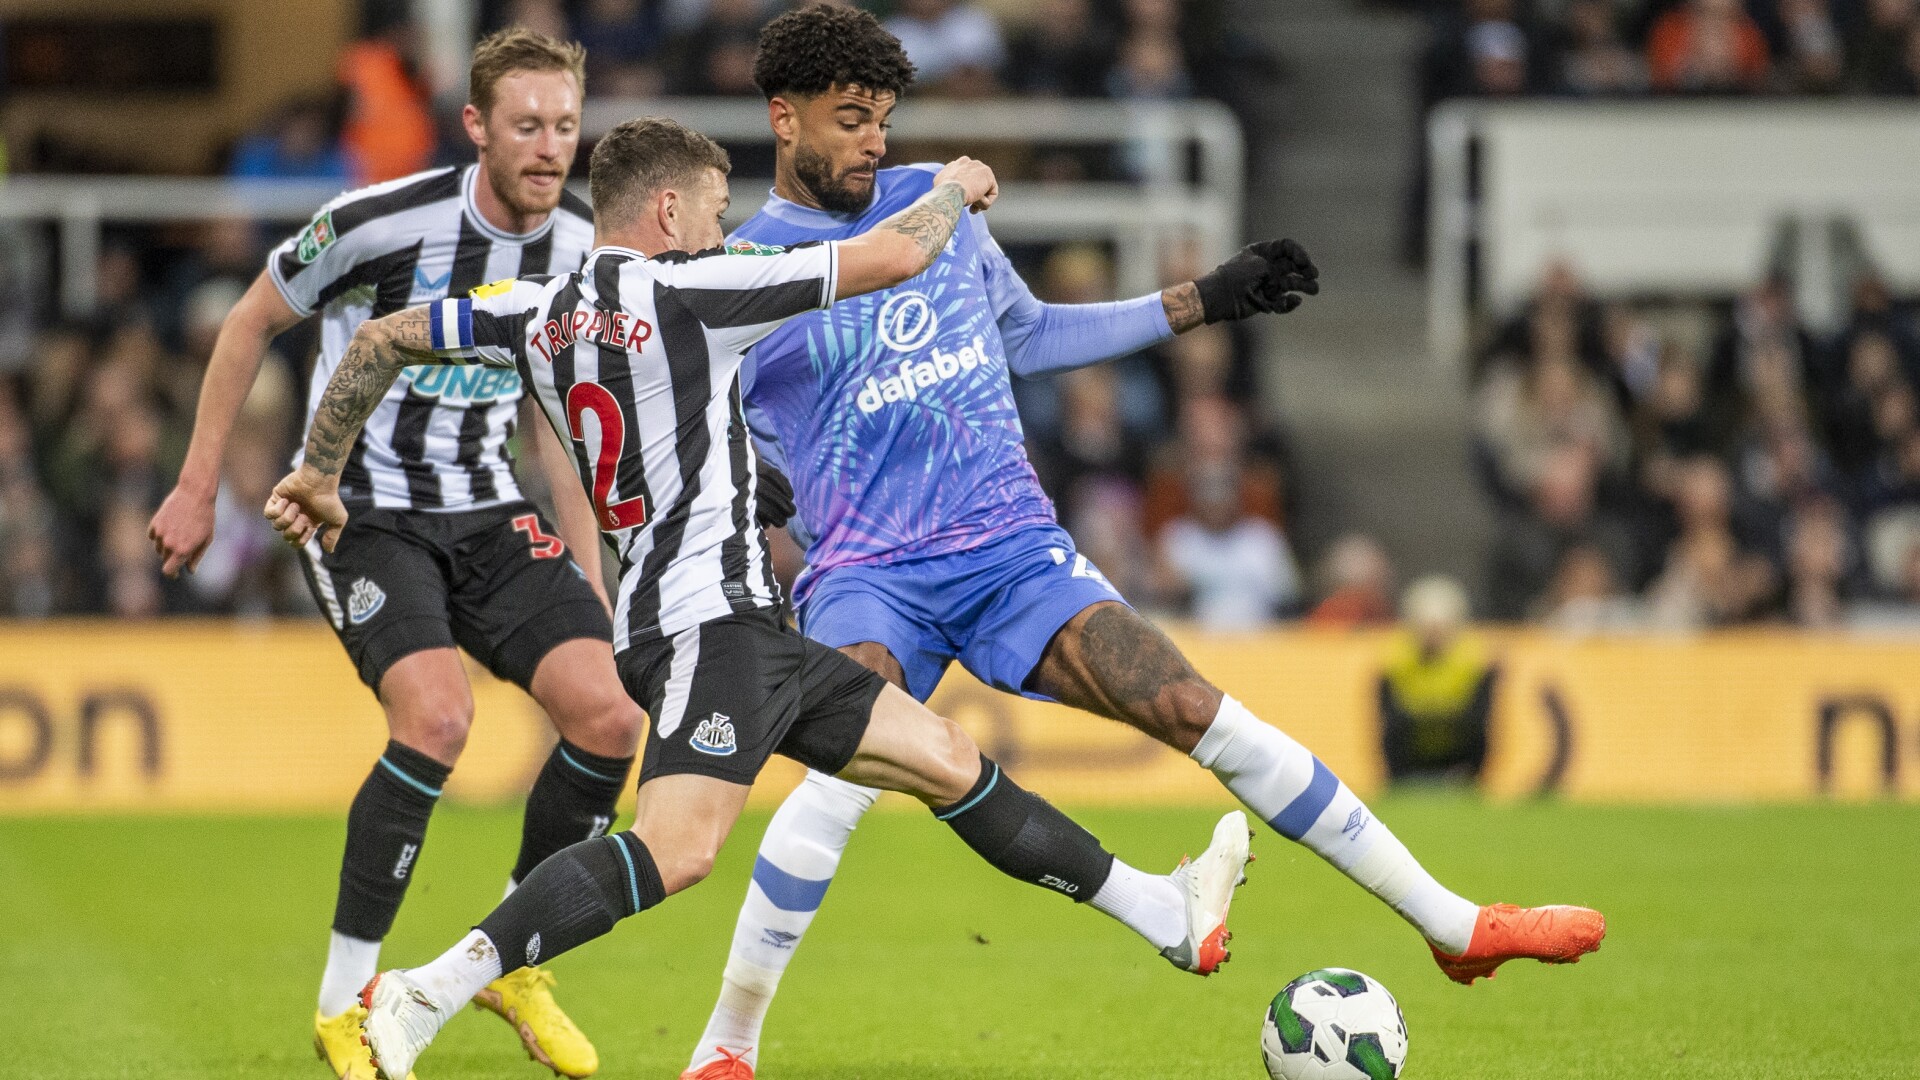 how to, newcastle vs bournemouth: how to watch live, stream link, team news, live updates